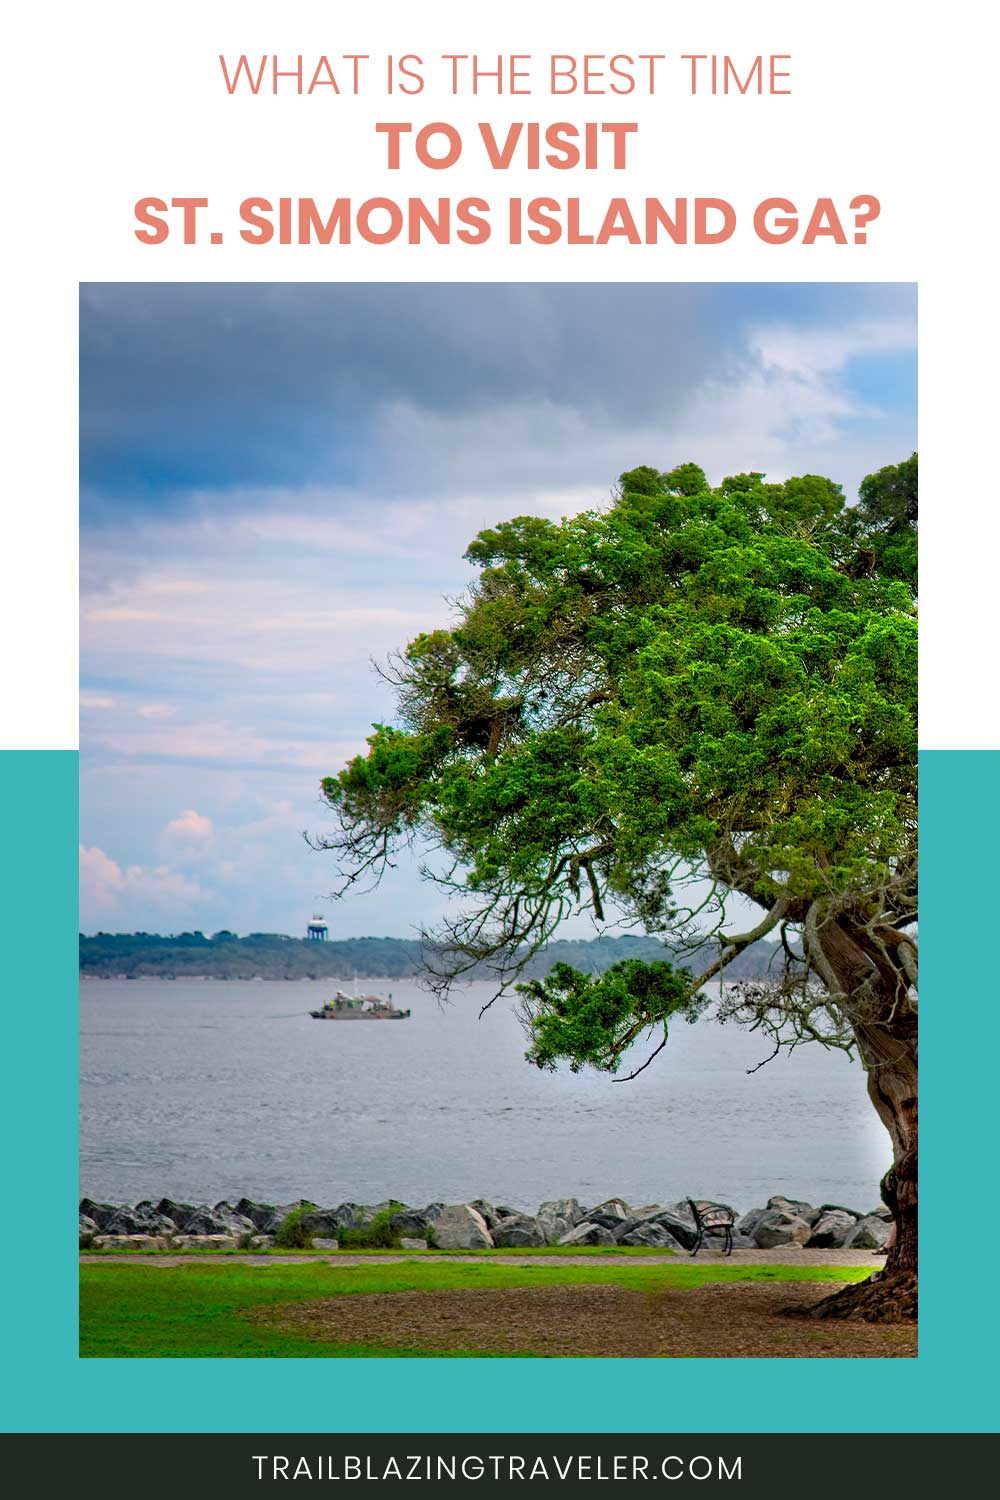 A big tree in front of a lake - What Is The Best Time To Visit St. Simons Island GA?